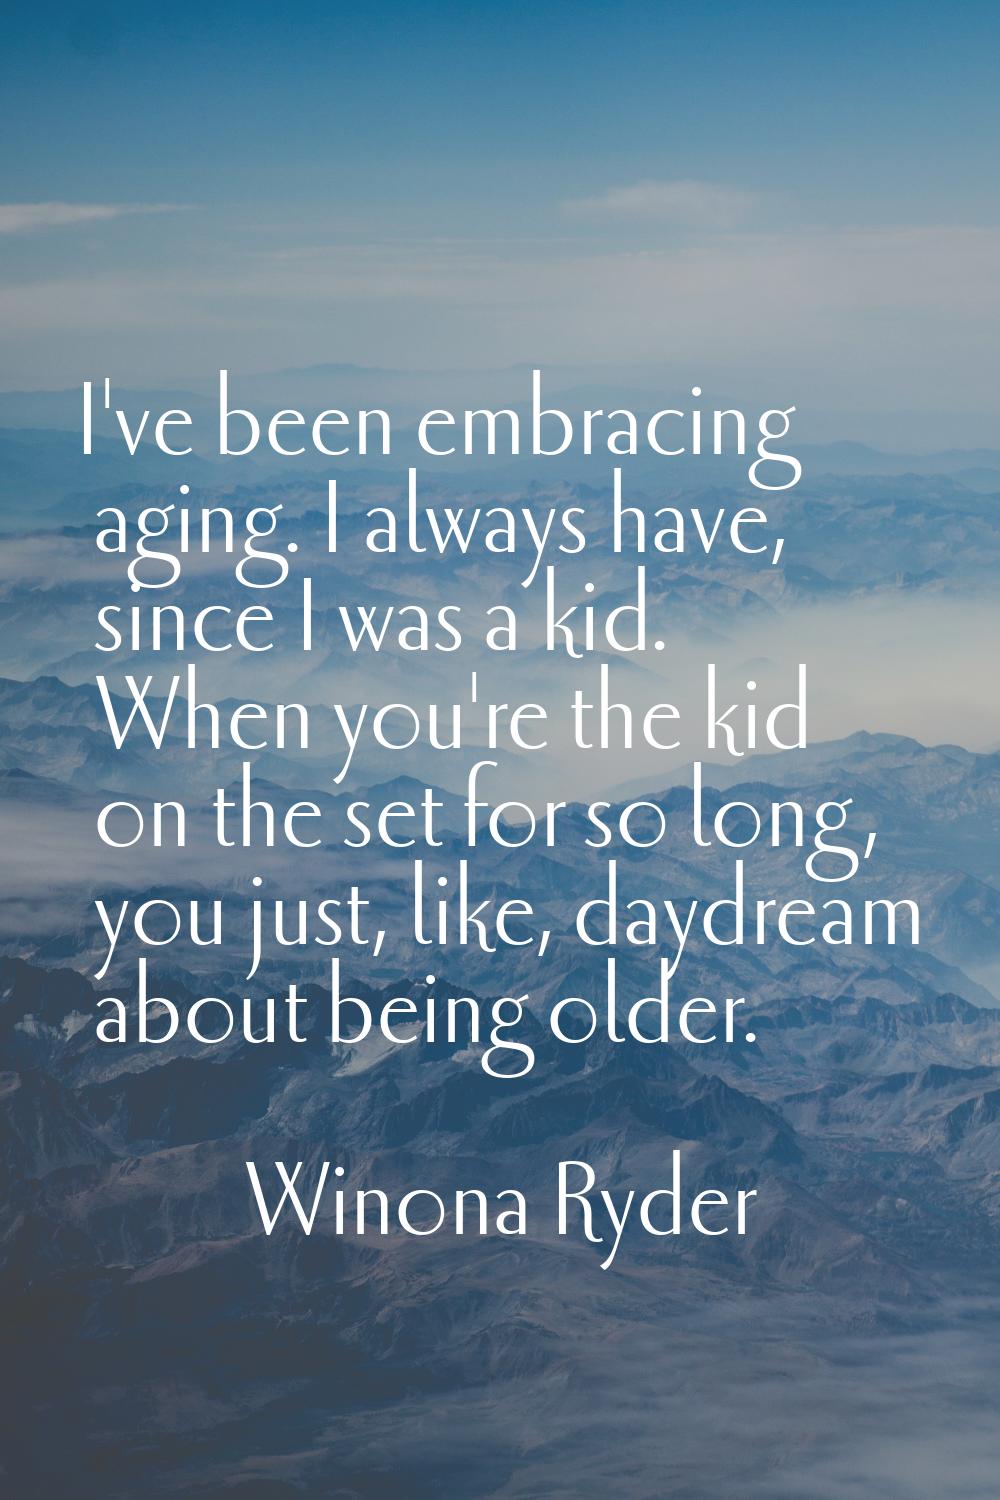 I've been embracing aging. I always have, since I was a kid. When you're the kid on the set for so 